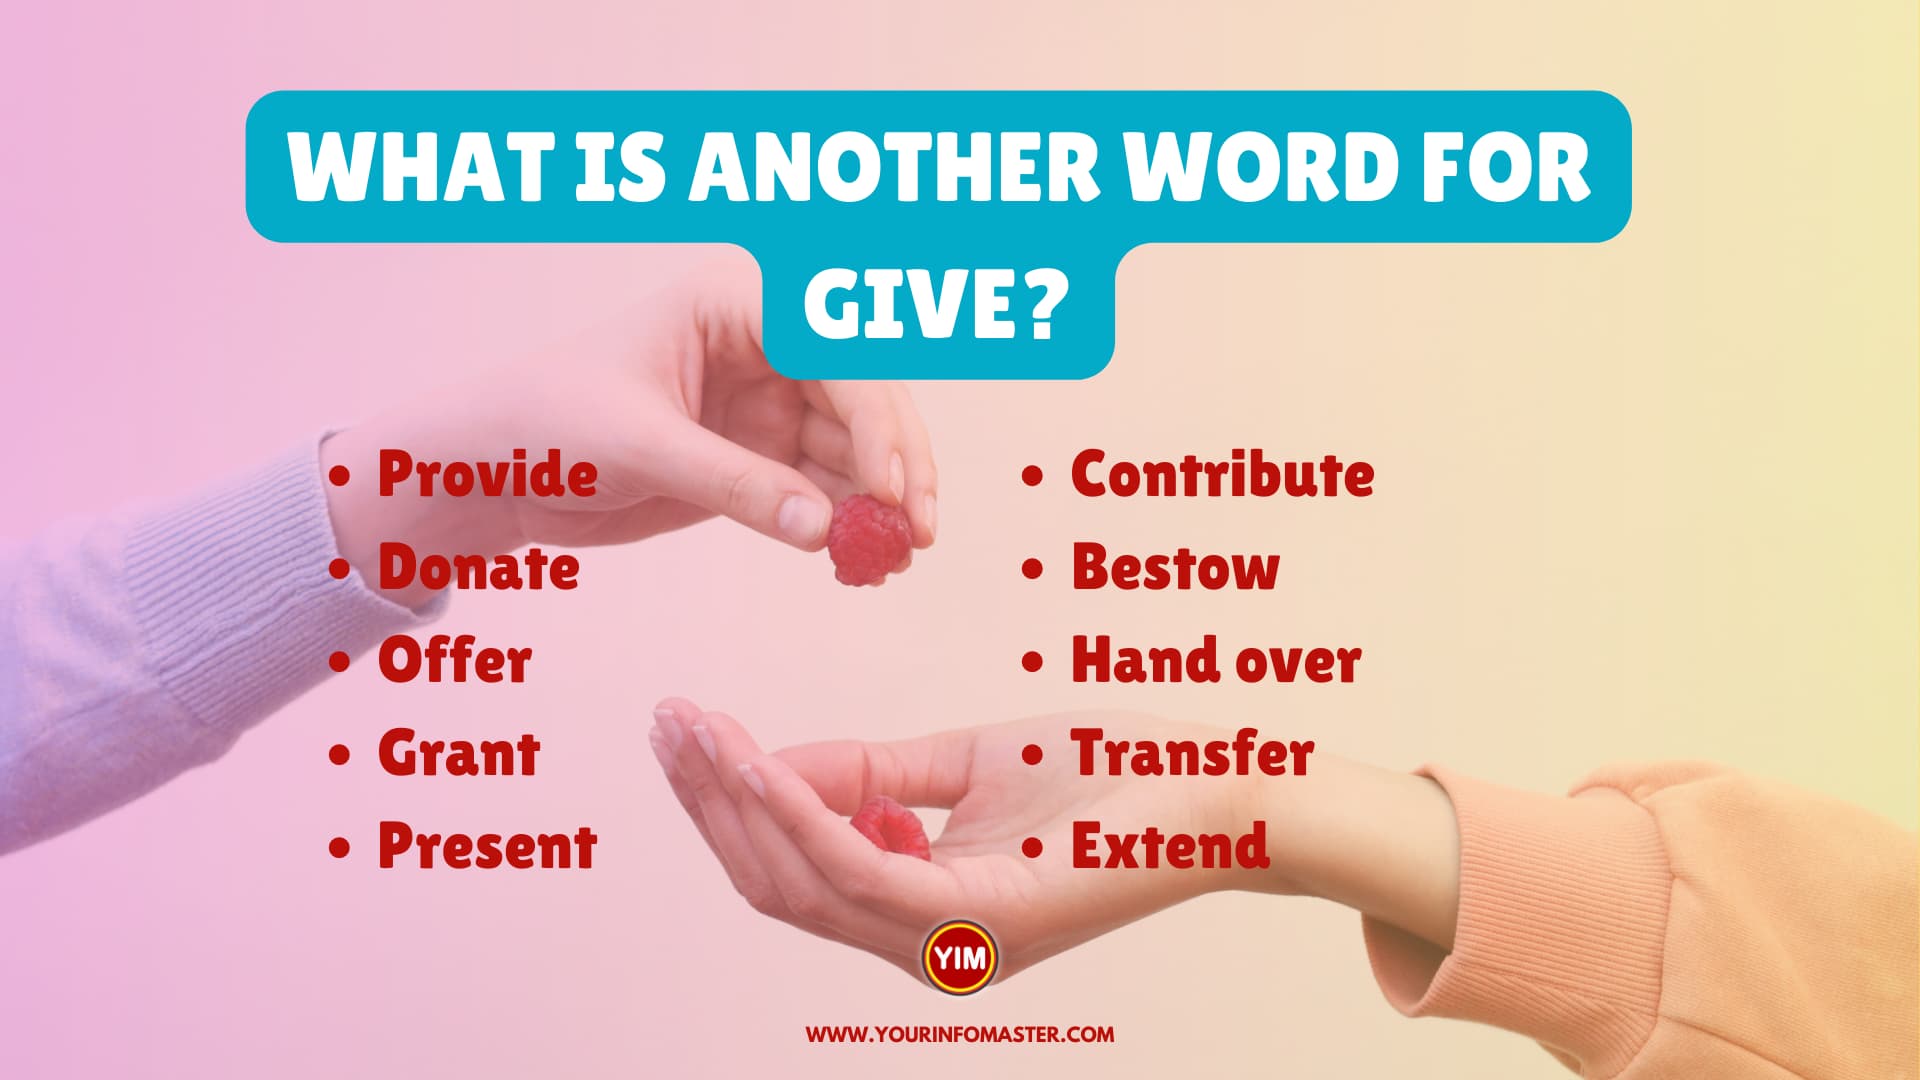 Give up away out back. Give synonyms. Give или gives. Vnother Word. Give gave given правила.